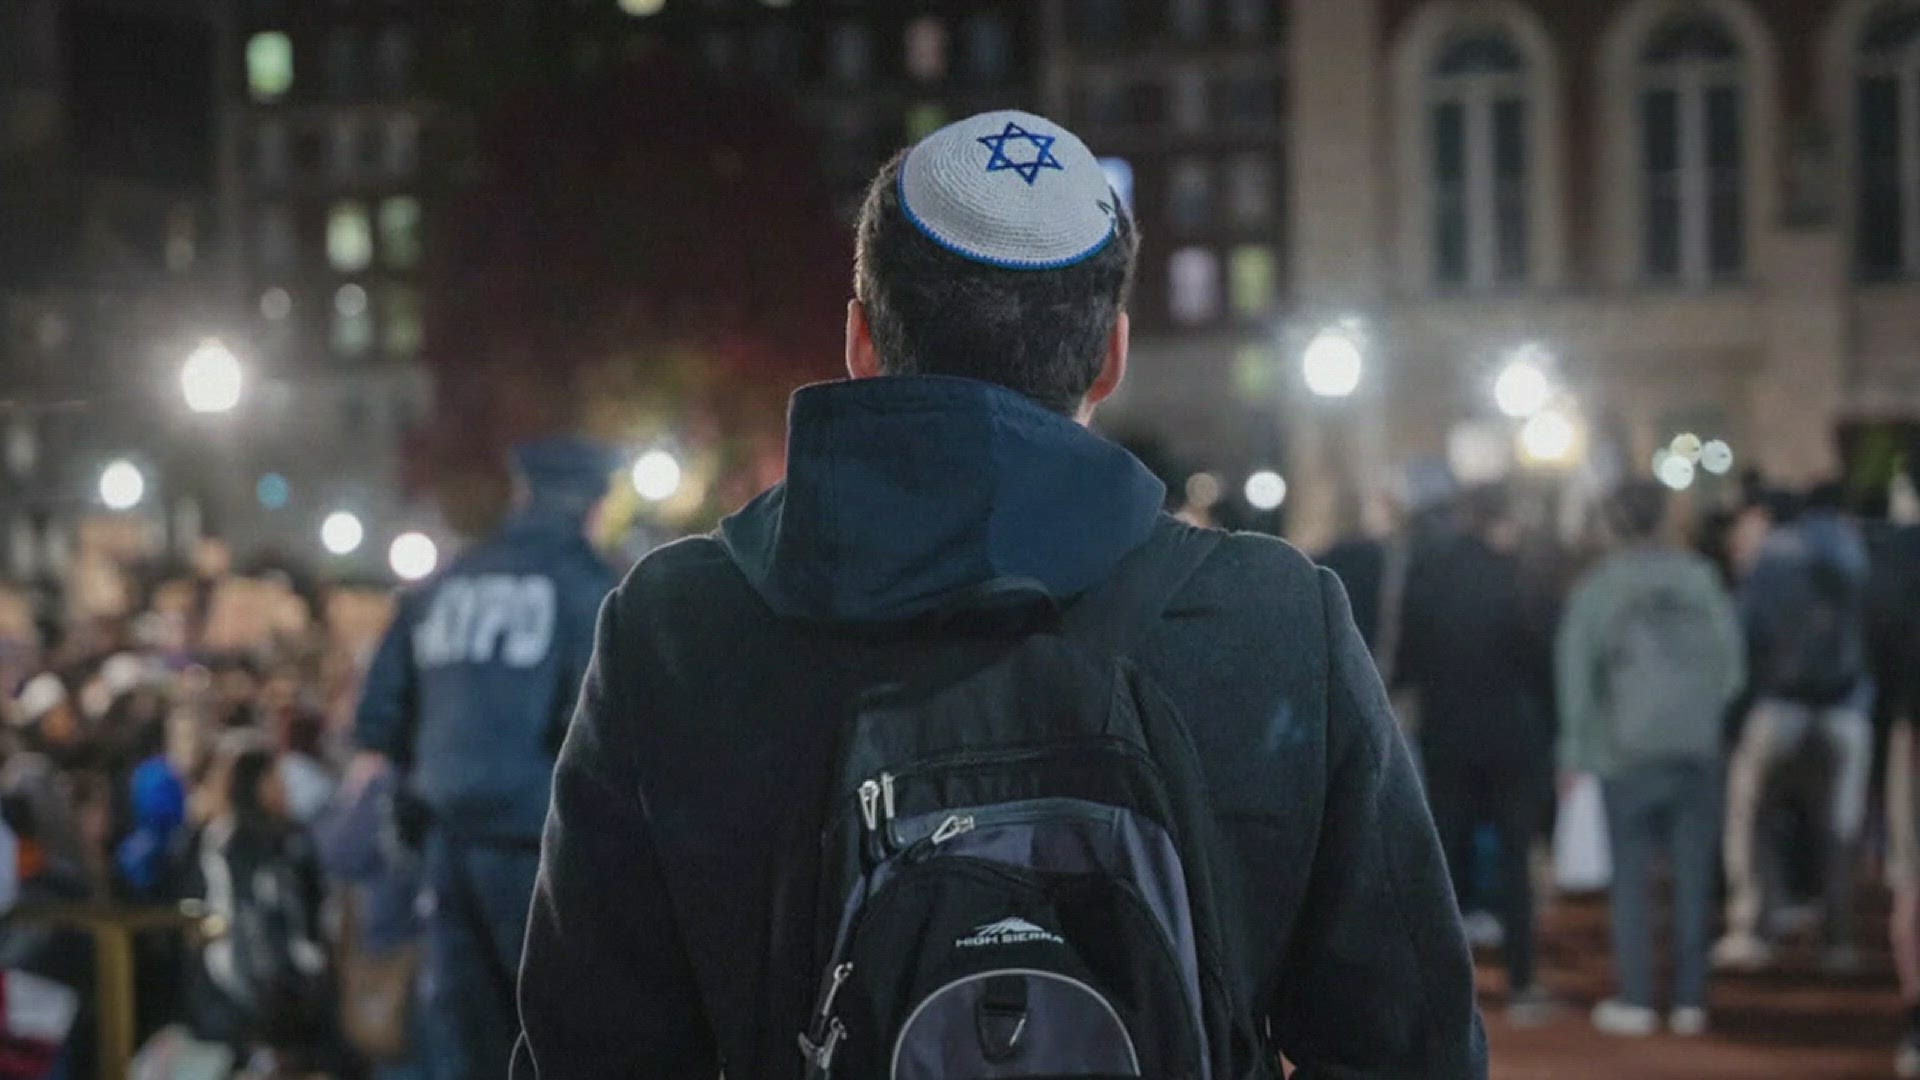 The ADL is currently urging lawmakers and schools to step up in the fight against anti-semitism after the group found an increase in incidents in its latest report.